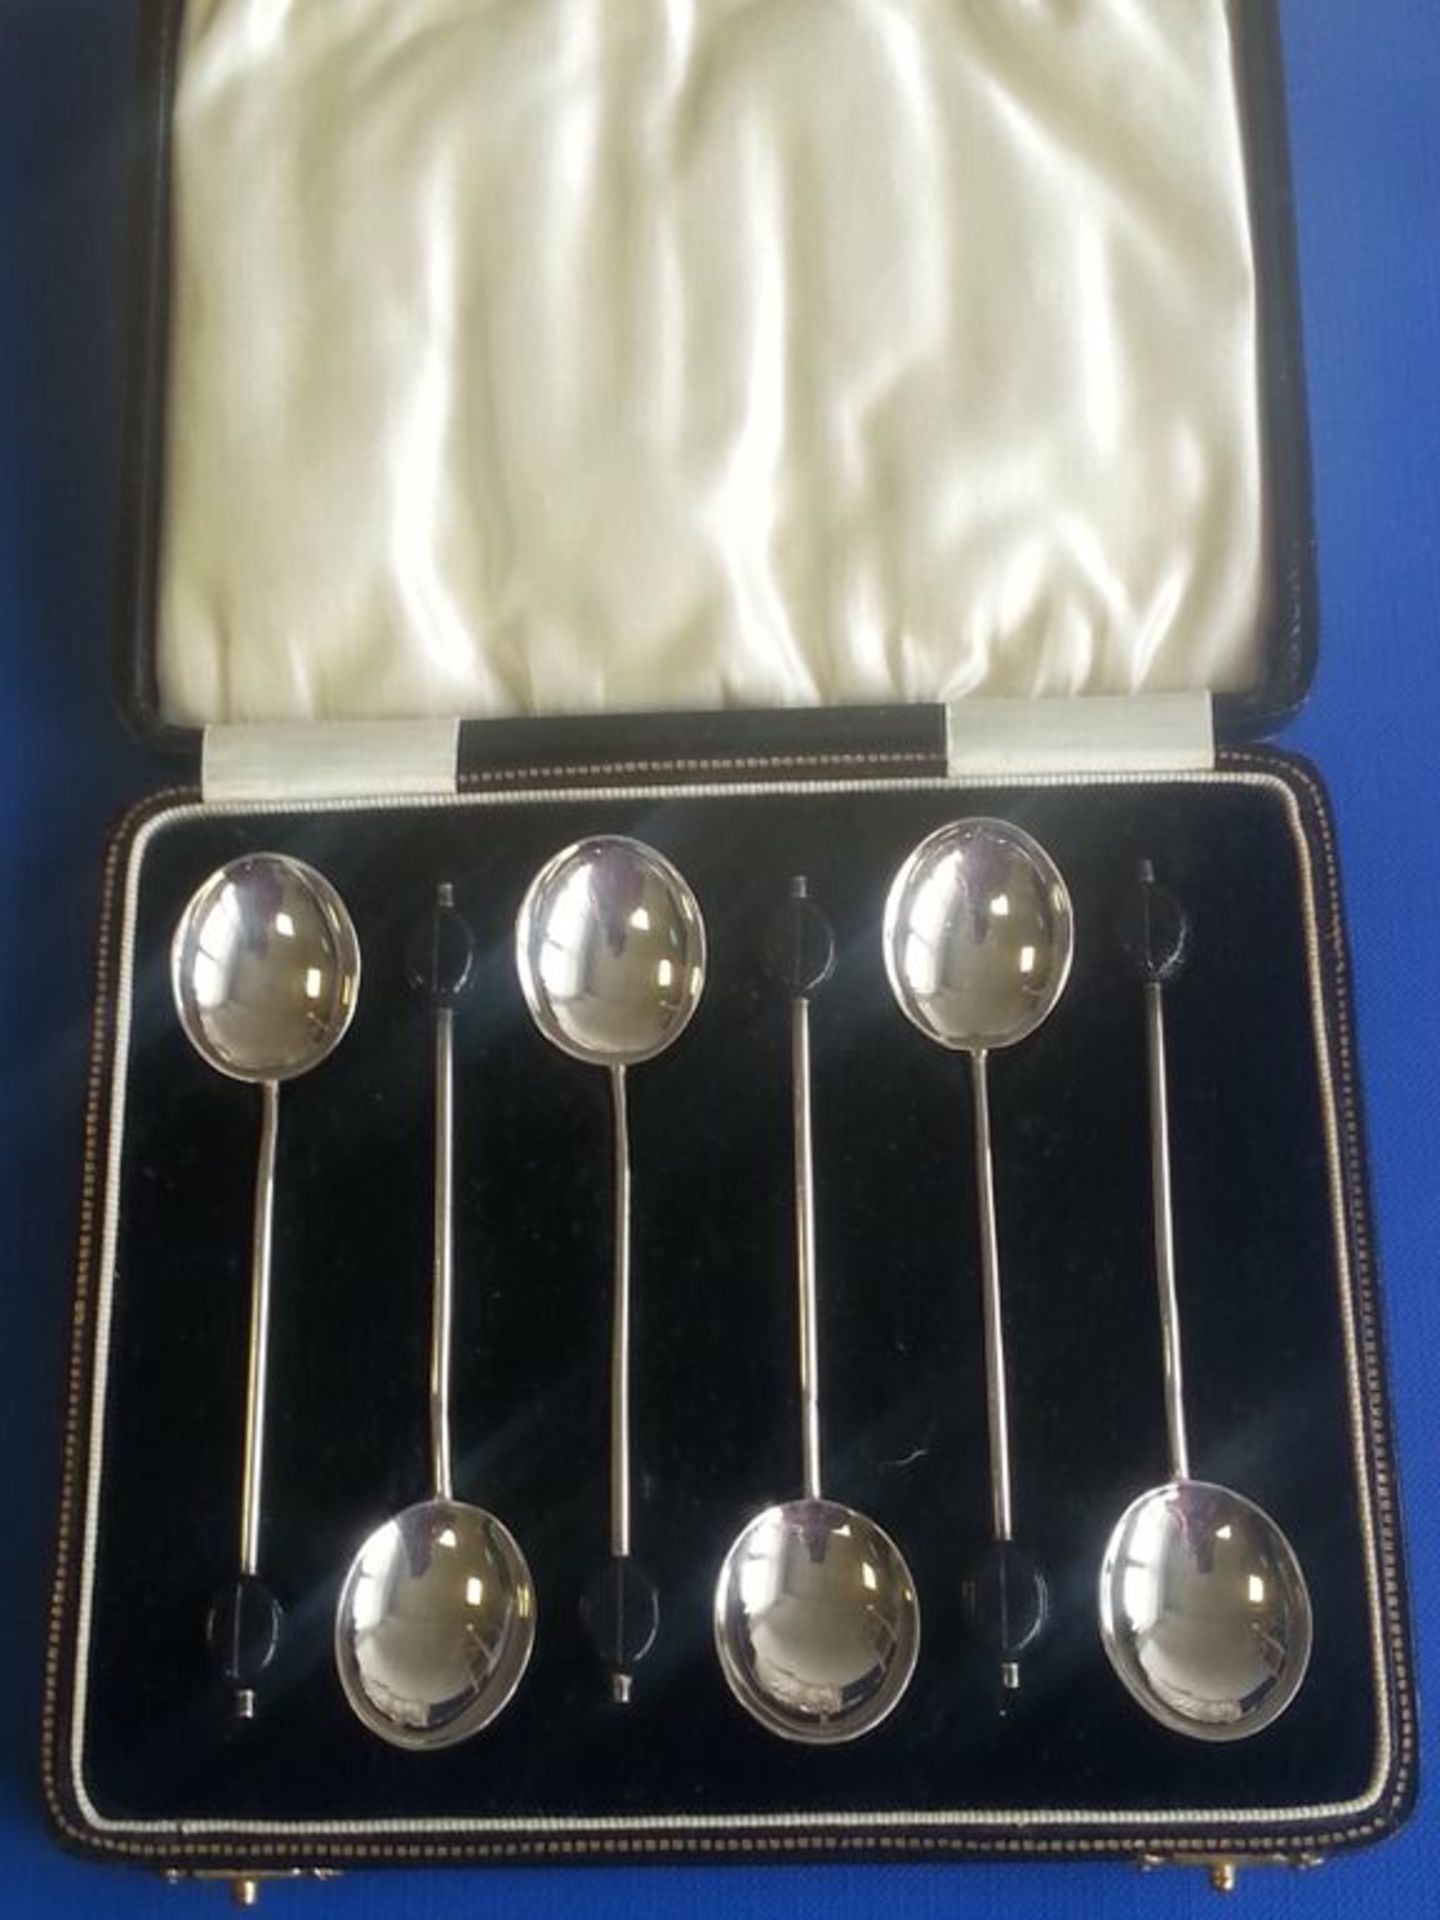 A Cased Set of Solid Silver Coffee Bean Spoons. Hallmarked Birmingham 1930. Maker Arthur Price.